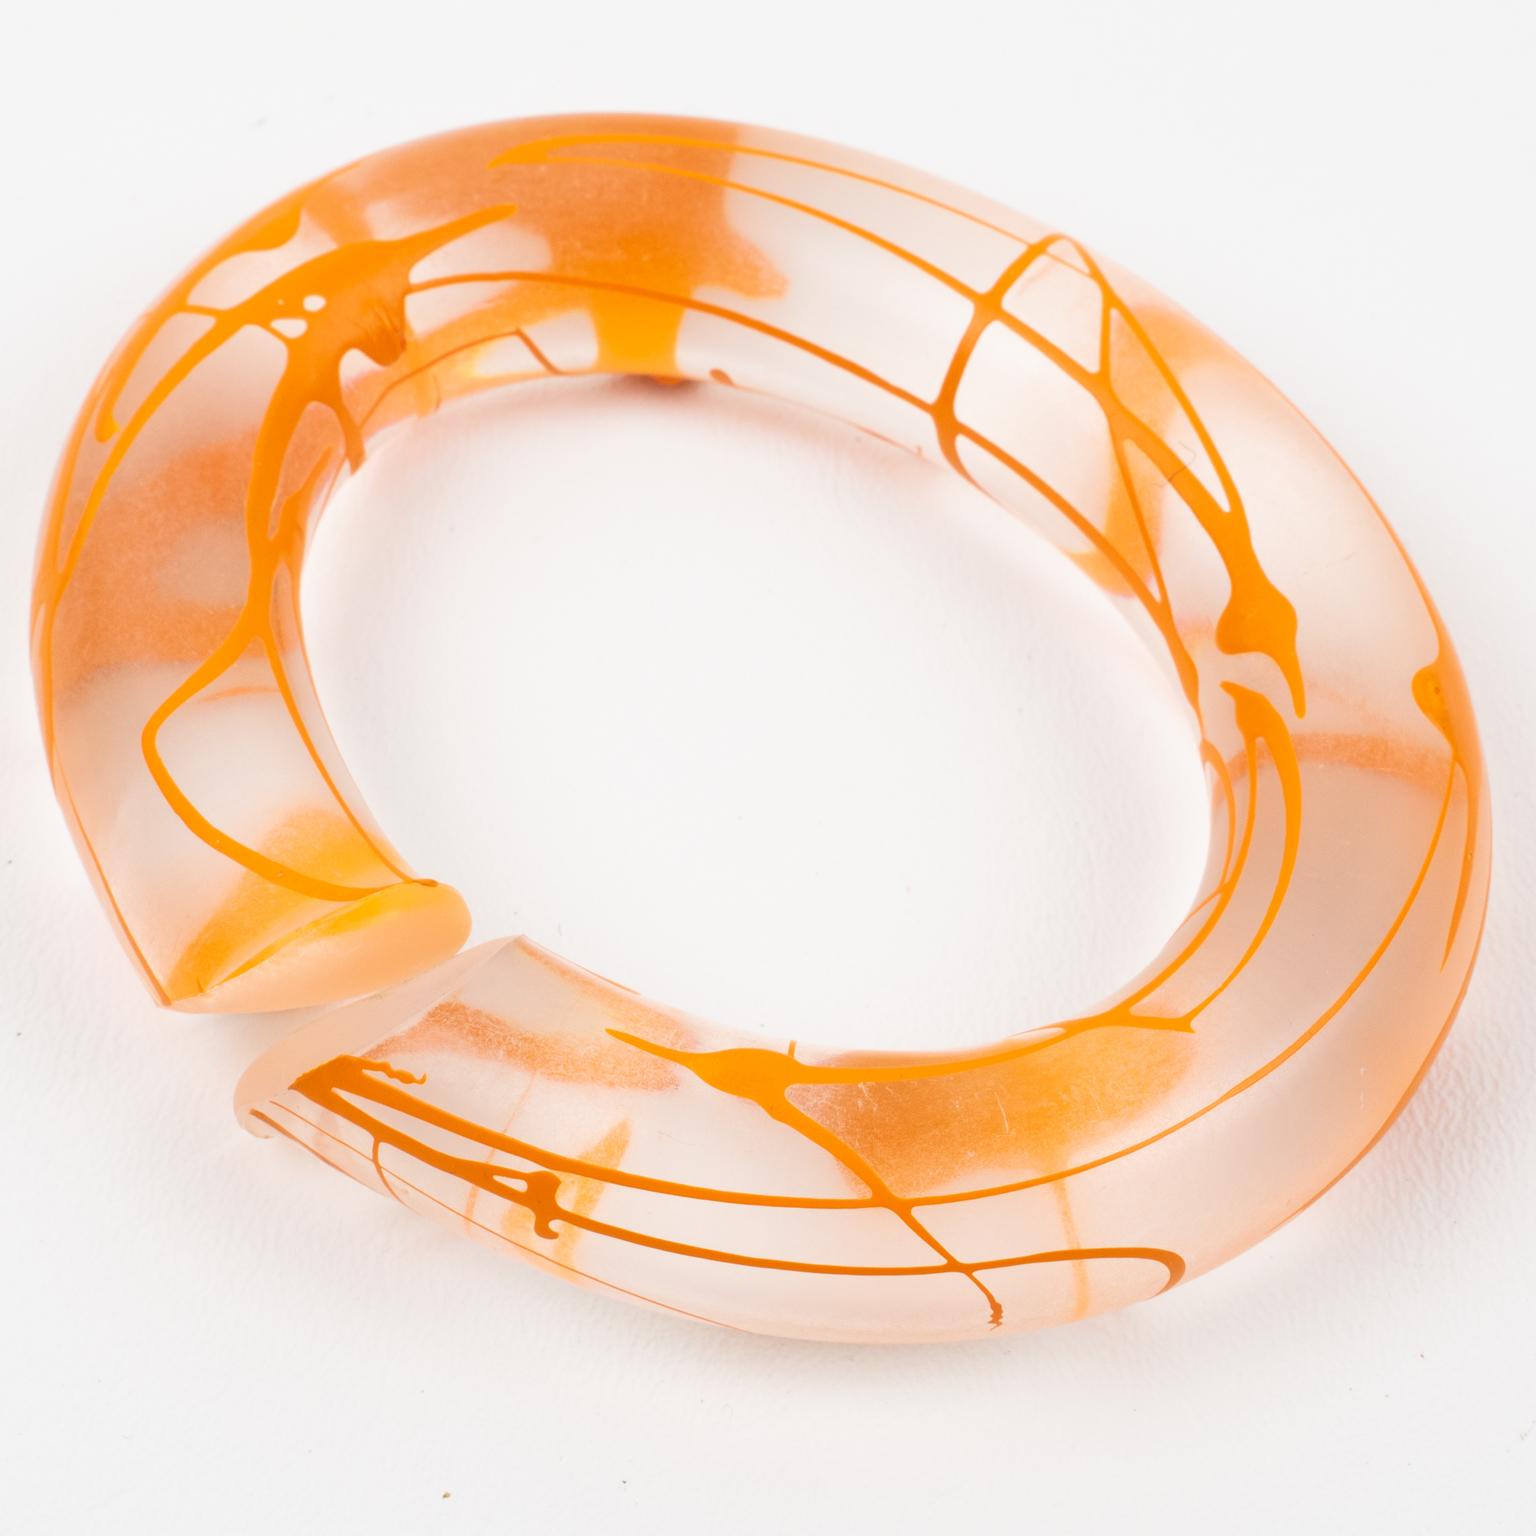 This is a rare English designer Marlene McKibbin Lucite or Acrylic bracelet bangle. This bracelet has a frosted translucent color with an open spiral design and has an orange acrylic screening ink application. 
Measurements: inside across is 2.75